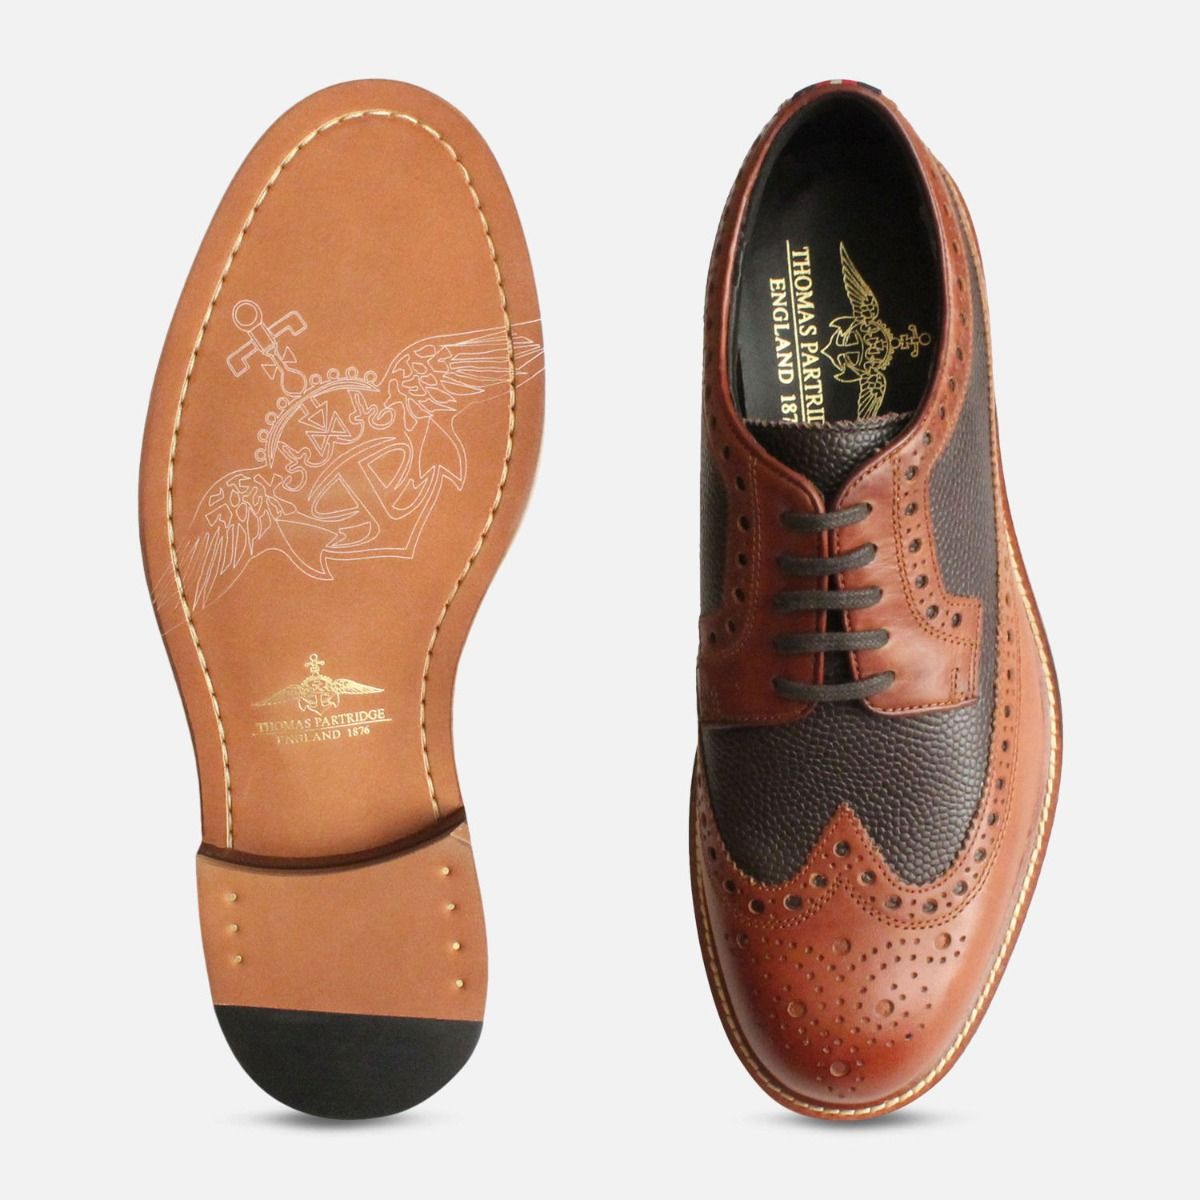 Tan Wingtip Two Tone Brogues by Thomas 